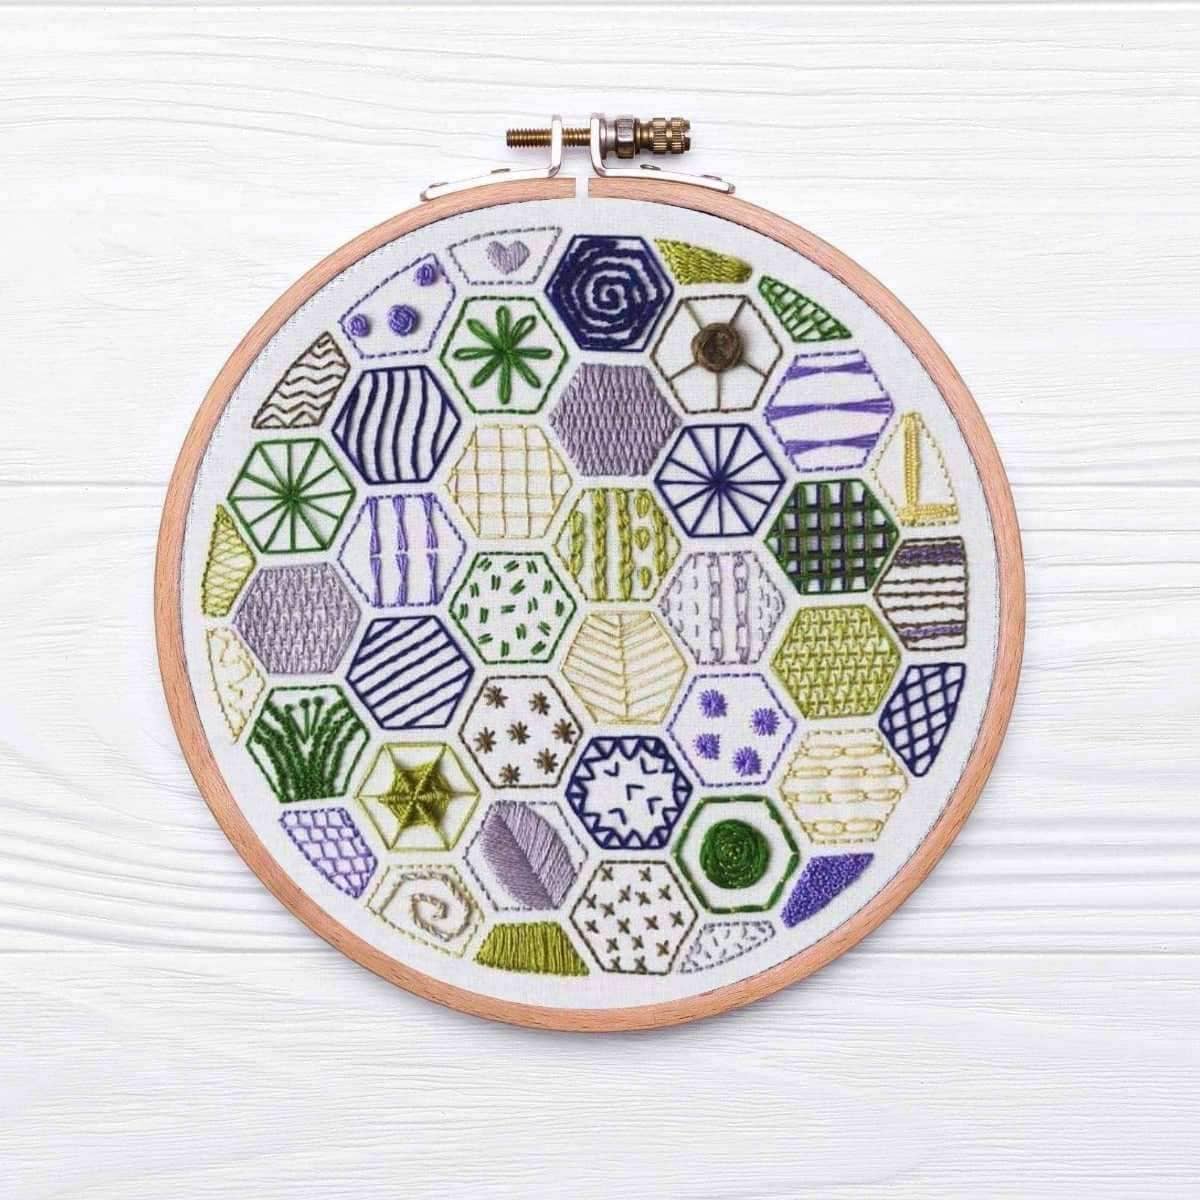 Hexagon Beginner Sampler, Pre Printed Embroidery Fabric Panel PLUS PDF Pattern , Pre Printed Fabric Pattern , StitchDoodles , embroidery hoop kit, Embroidery Kit, embroidery kits for beginners, embroidery pattern, hand embroidery, hand embroidery fabric, PDF pattern, unique embroidery kits , StitchDoodles , shop.stitchdoodles.com